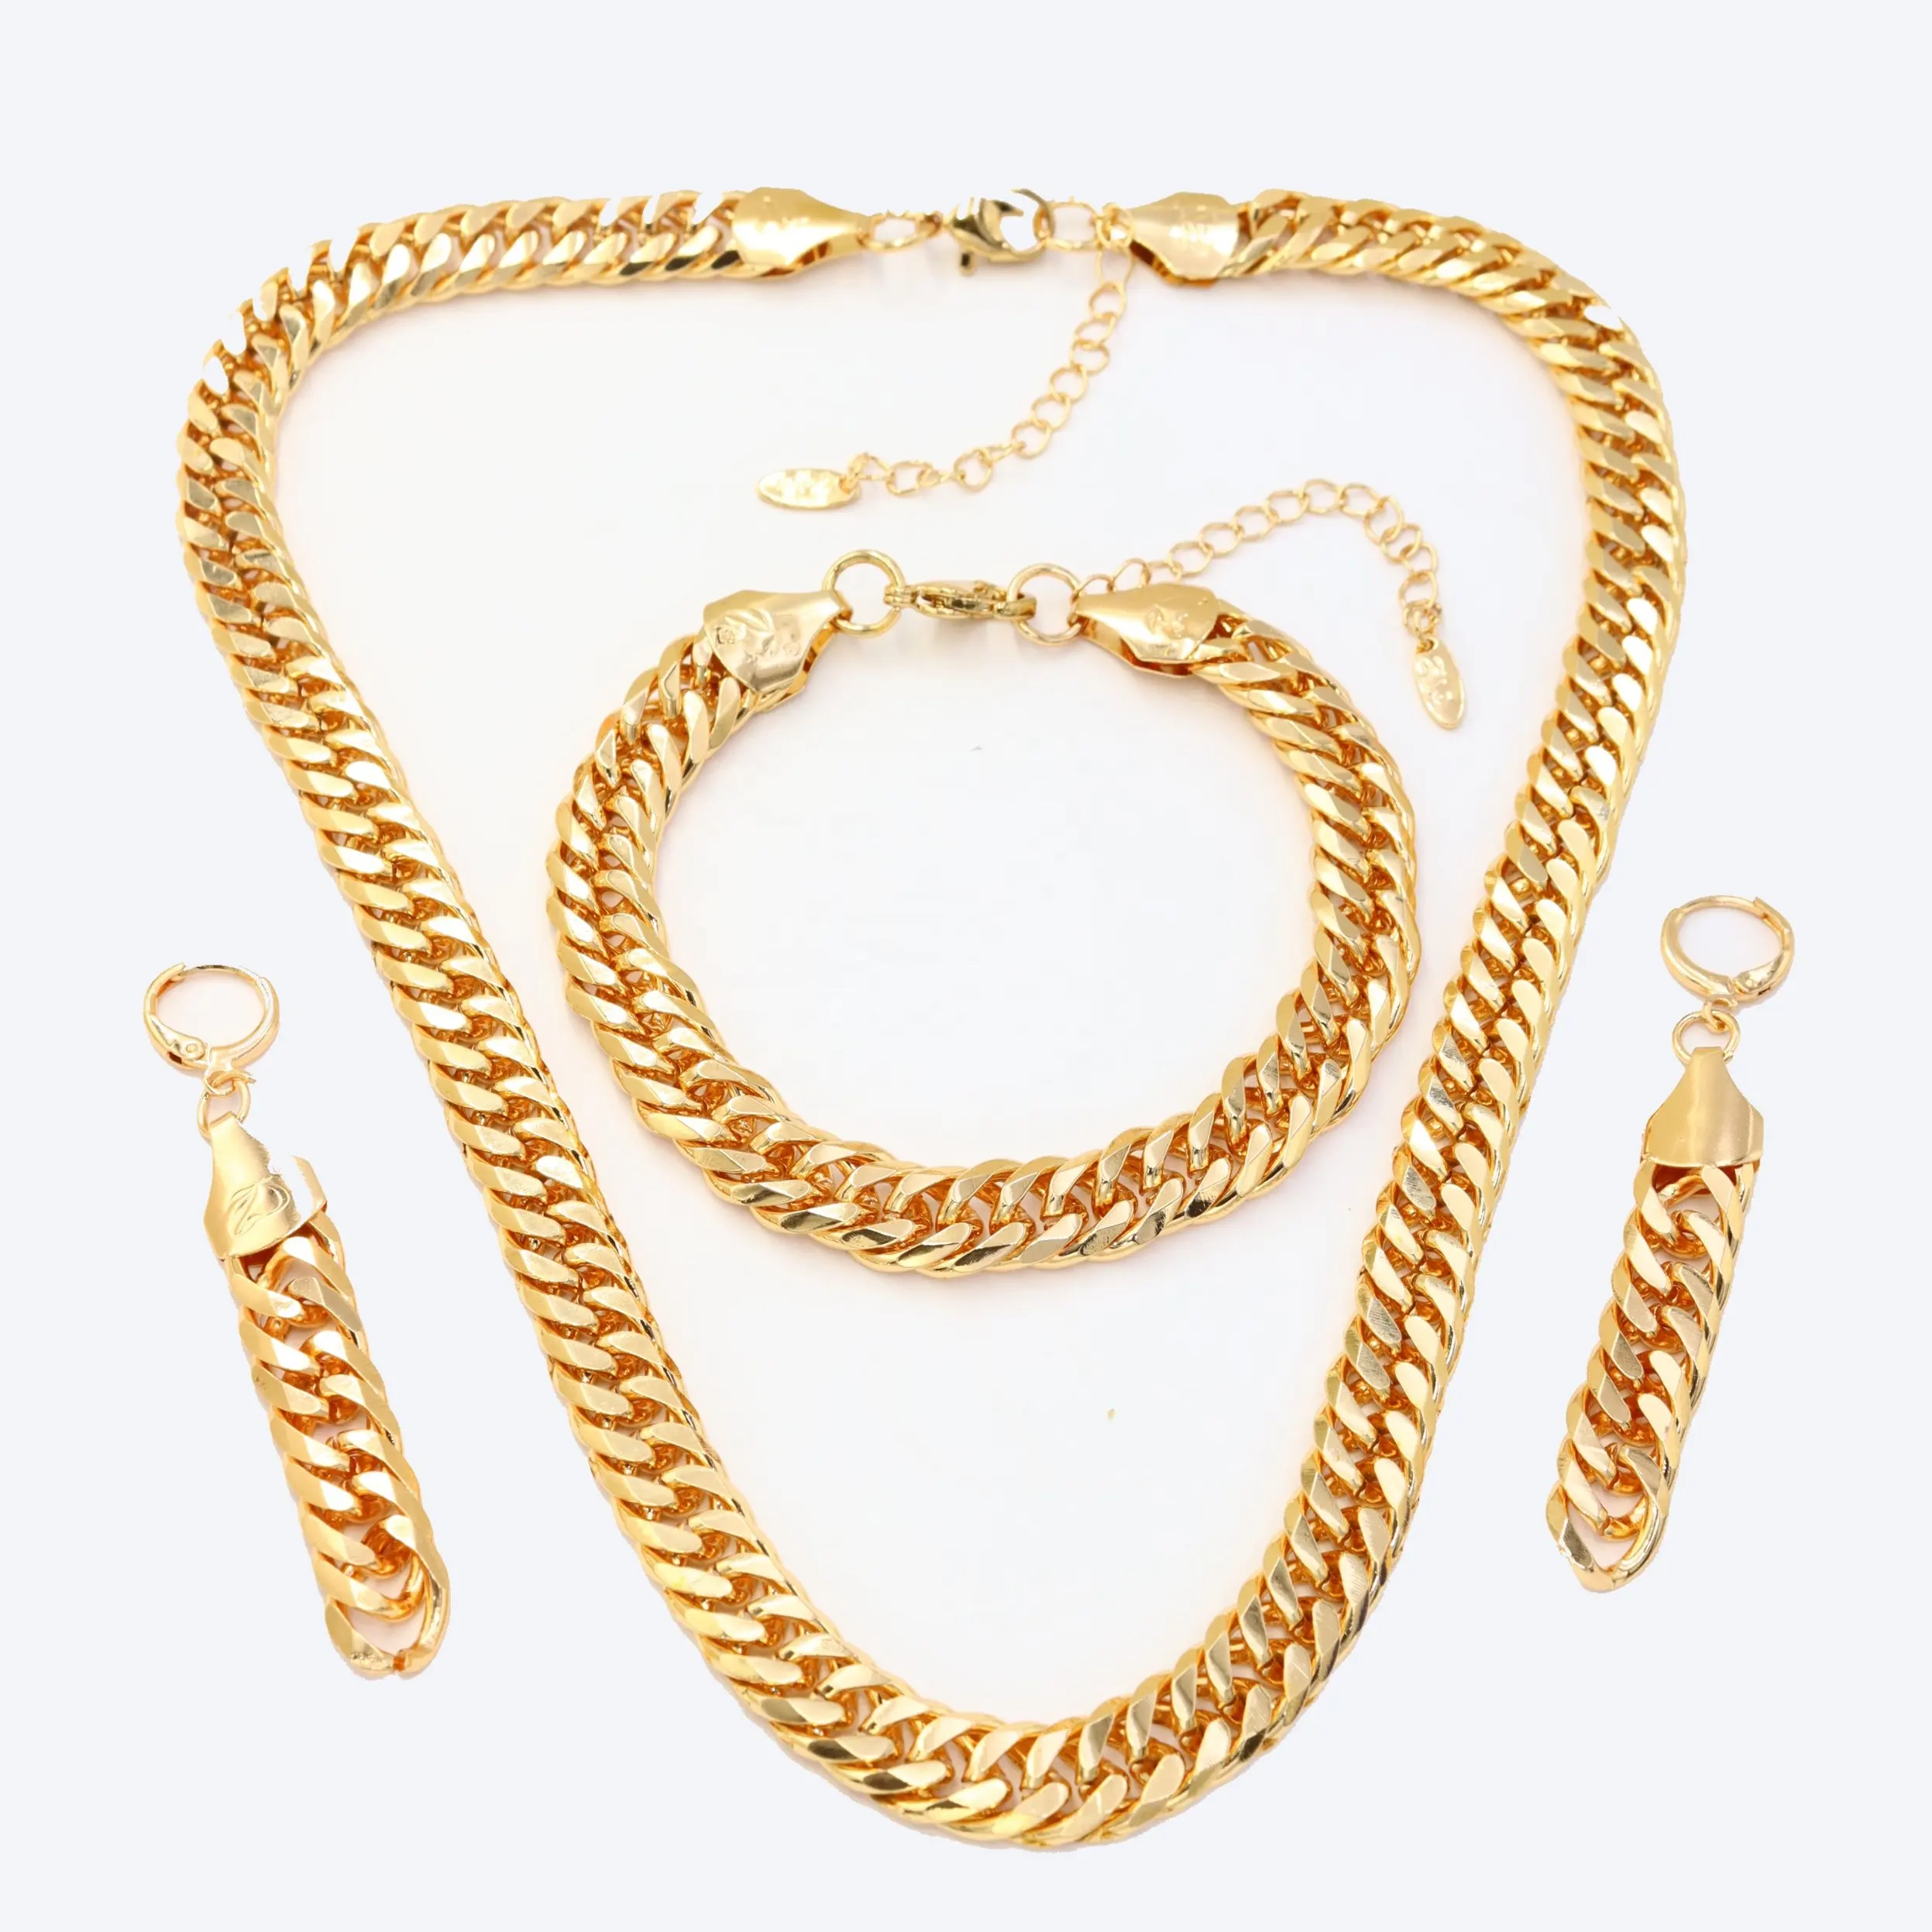 Miami Unisex Cuban Link Rhodium Made Necklace Chain set Bracelet Gold Plated Cuban Link Ear ring Jewellery Set